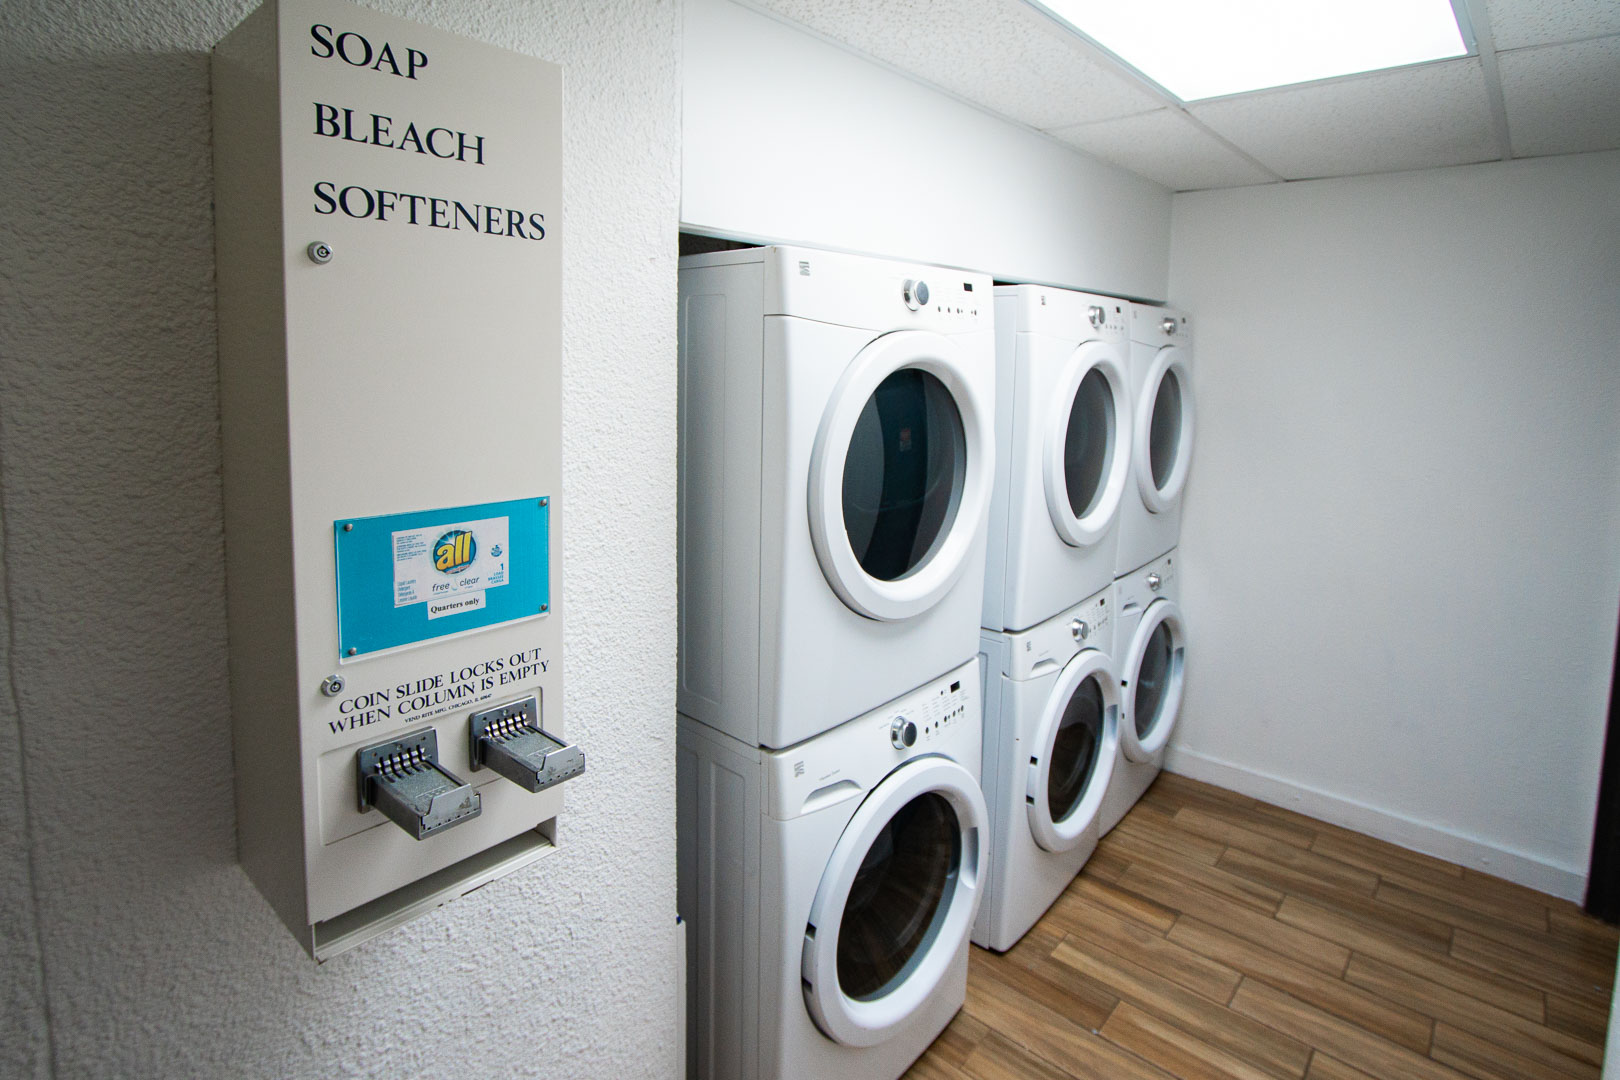 Resort amenities include laundry facilities at VRI's Bay Club of Sandestin in Florida.